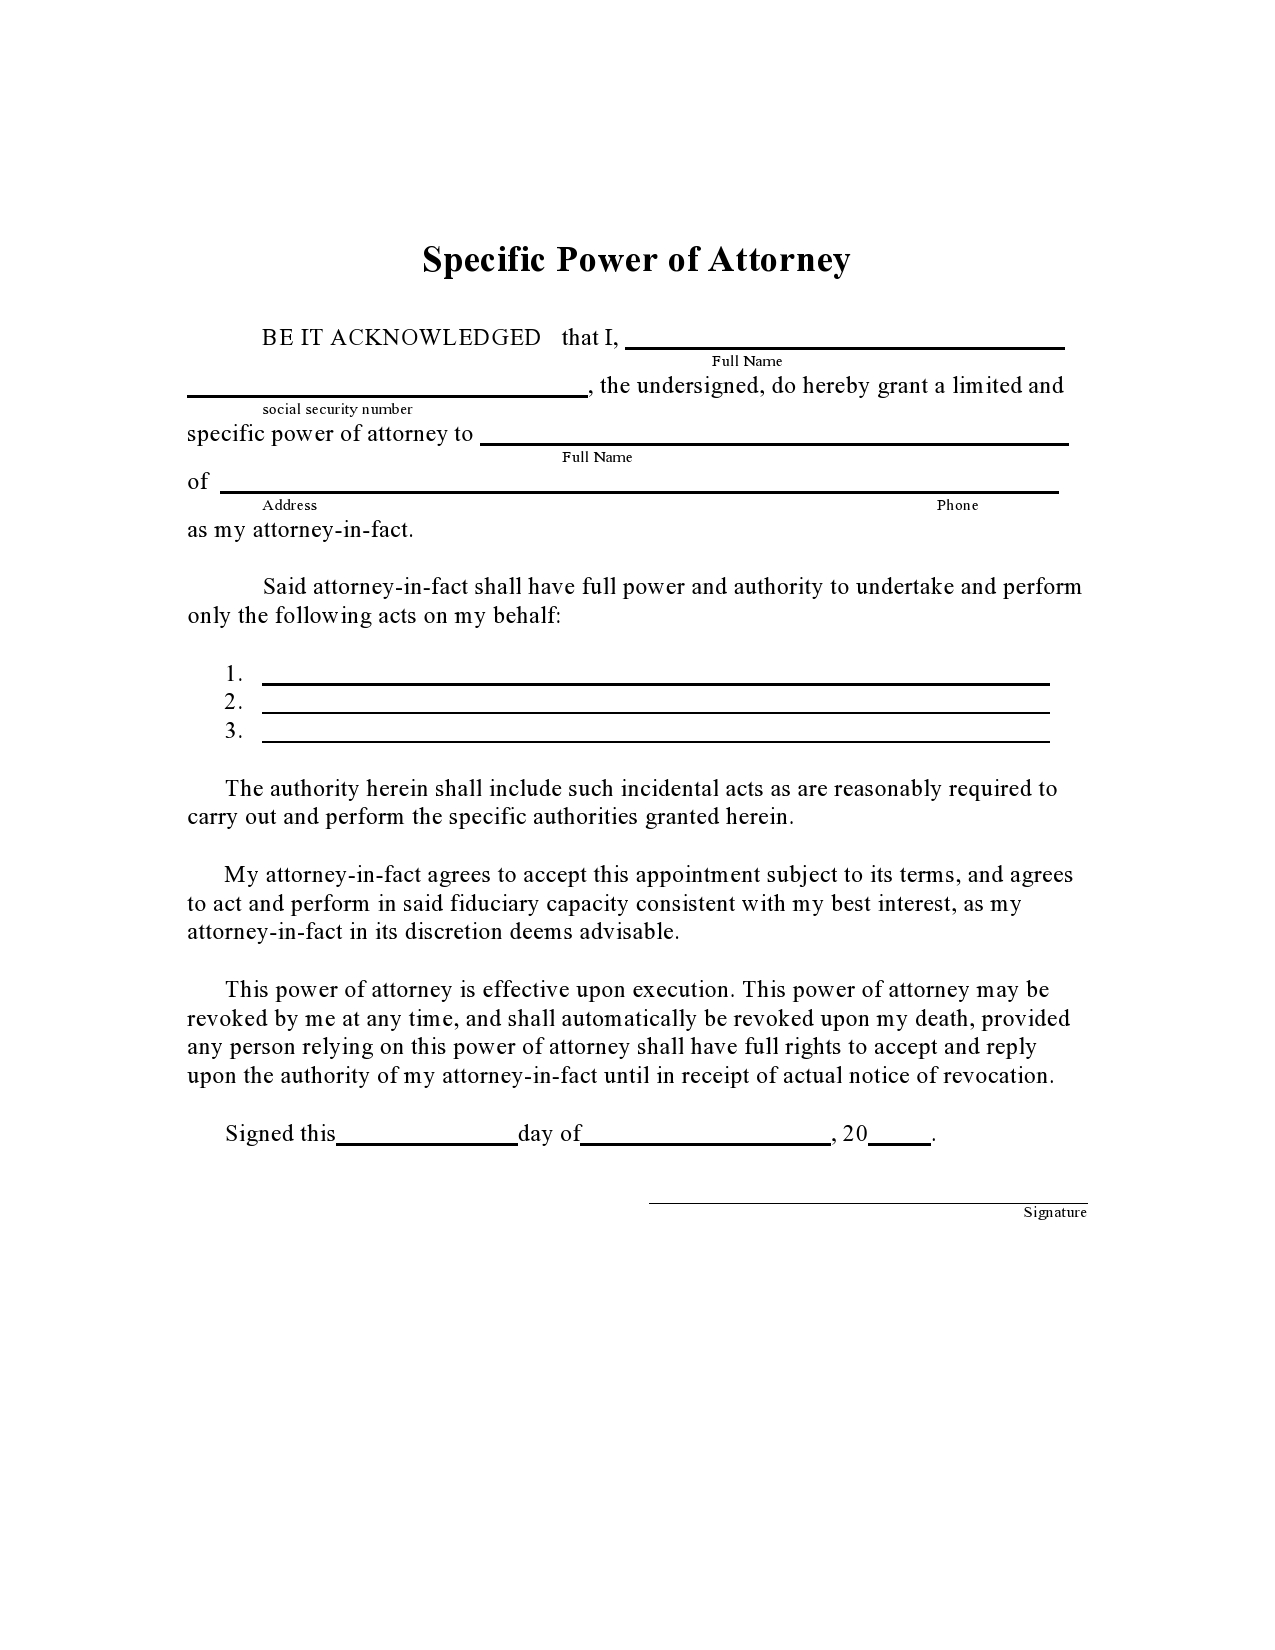 Free limited power of attorney 13